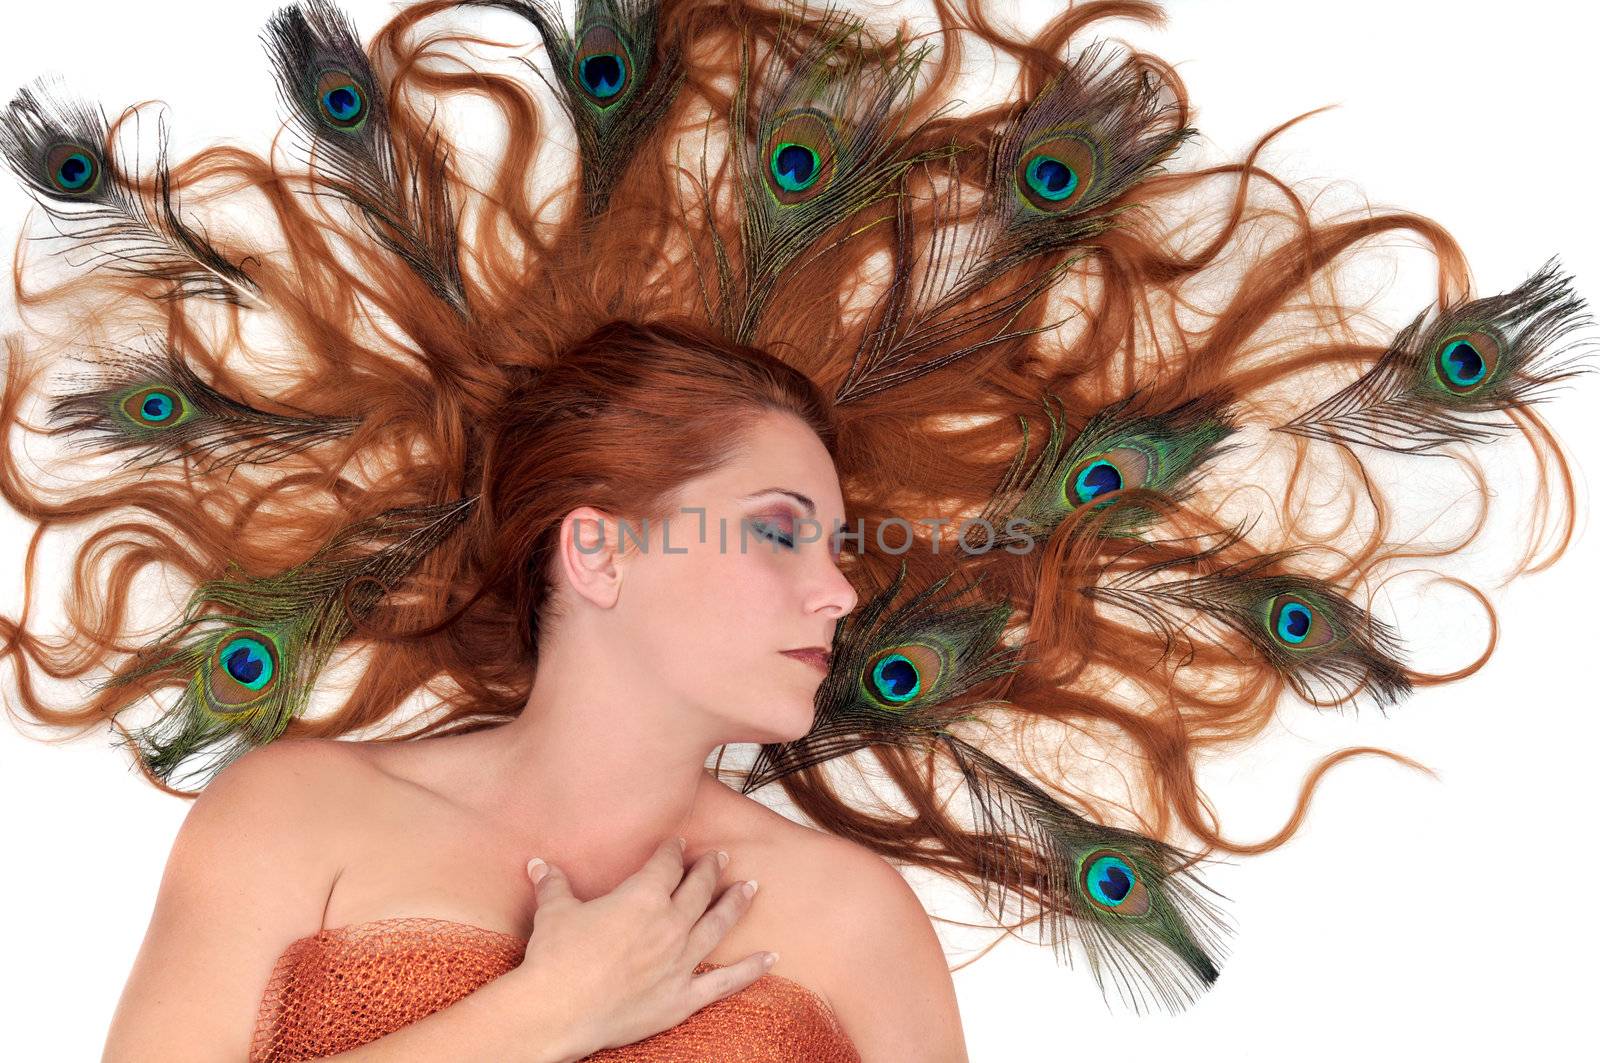 Autumn Fairy Concept - Redhead With Peacock Feathers in Her Hair on White Background